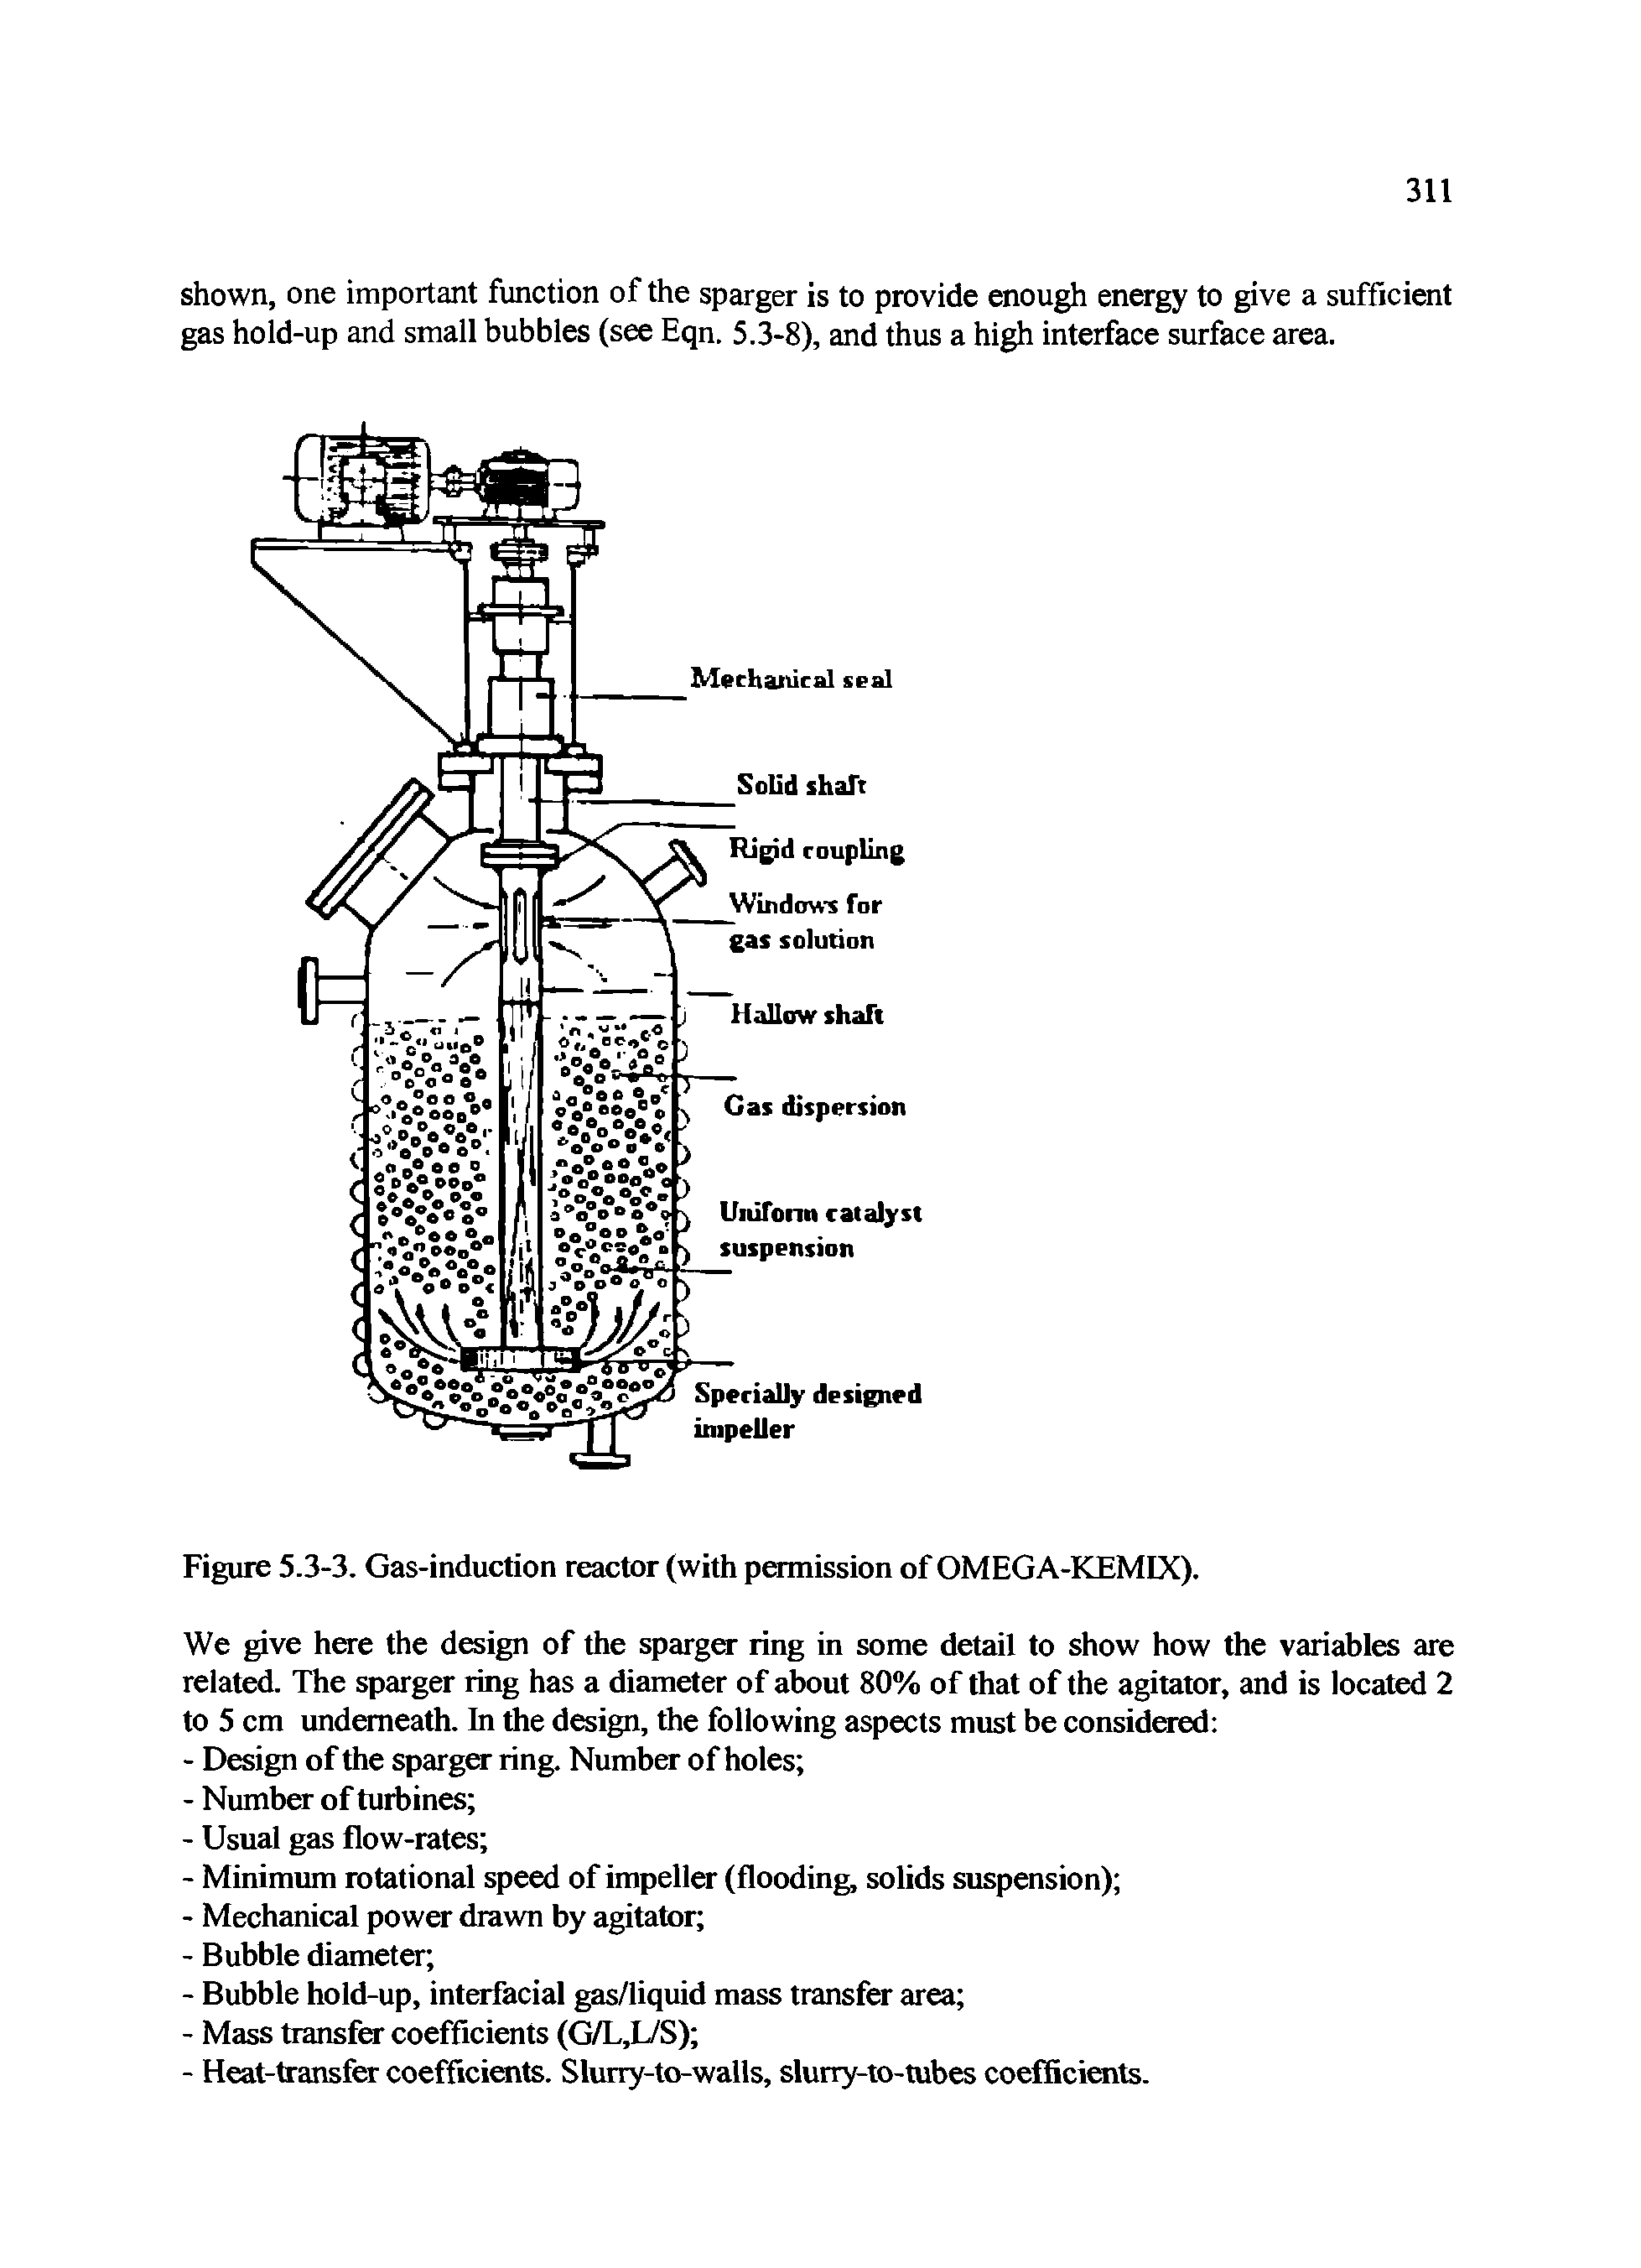 Figure 5.3-3. Gas-induction reactor (with permission of OMEGA-KEMIX).